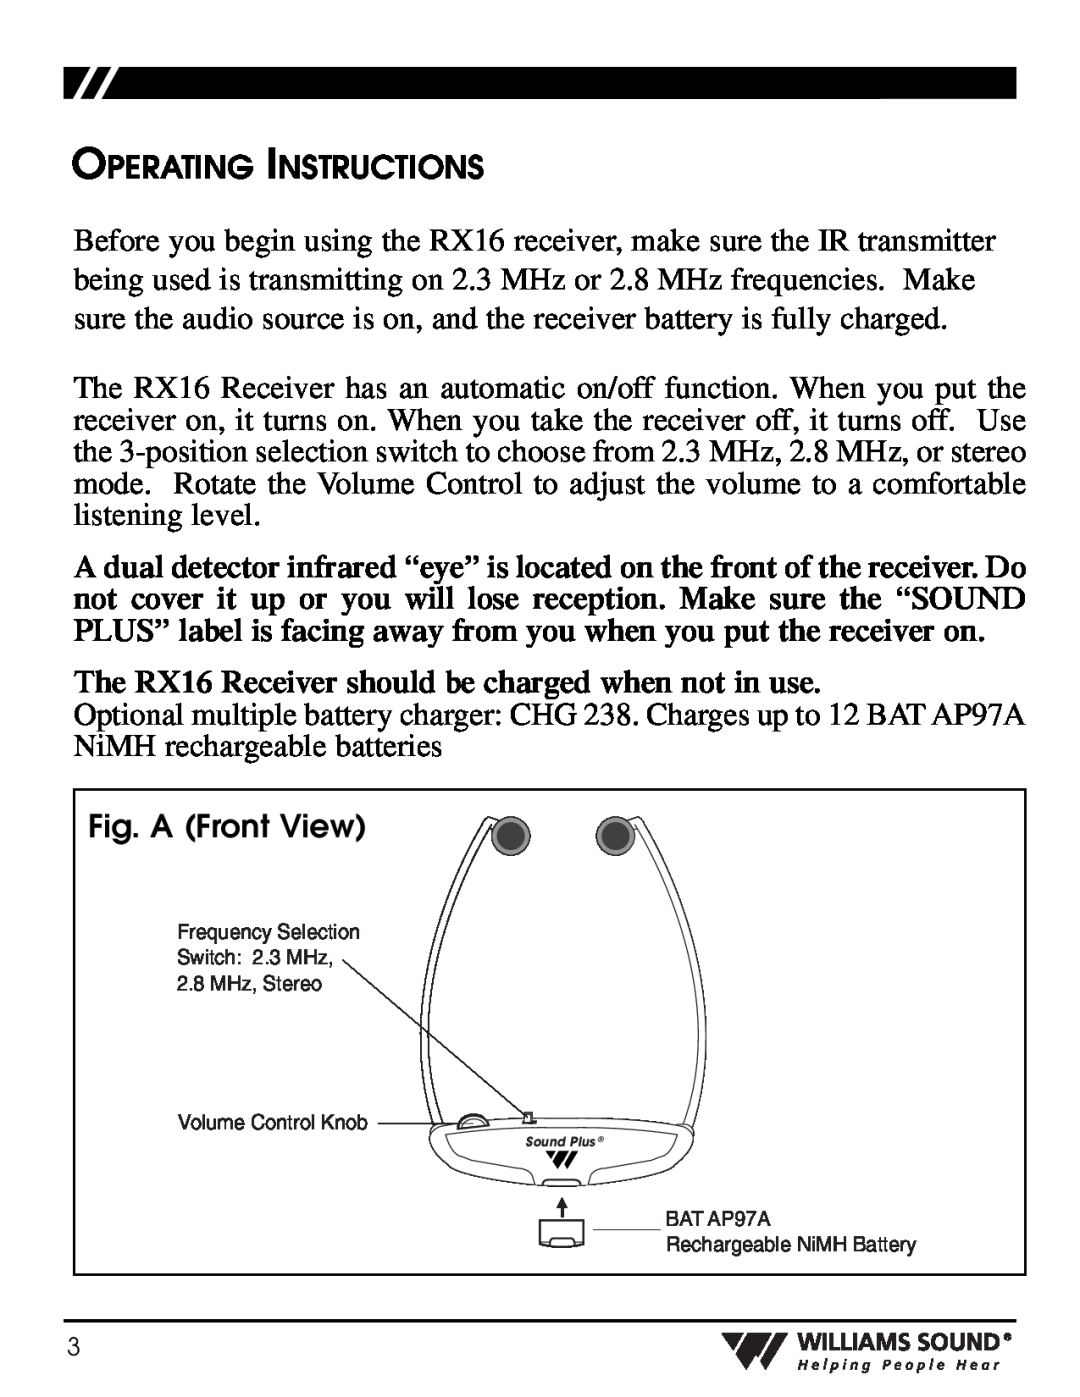 Williams Sound WIR RX16 manual Operating Instructions, Fig. A Front View, Frequency Selection Switch 2.3 MHz 